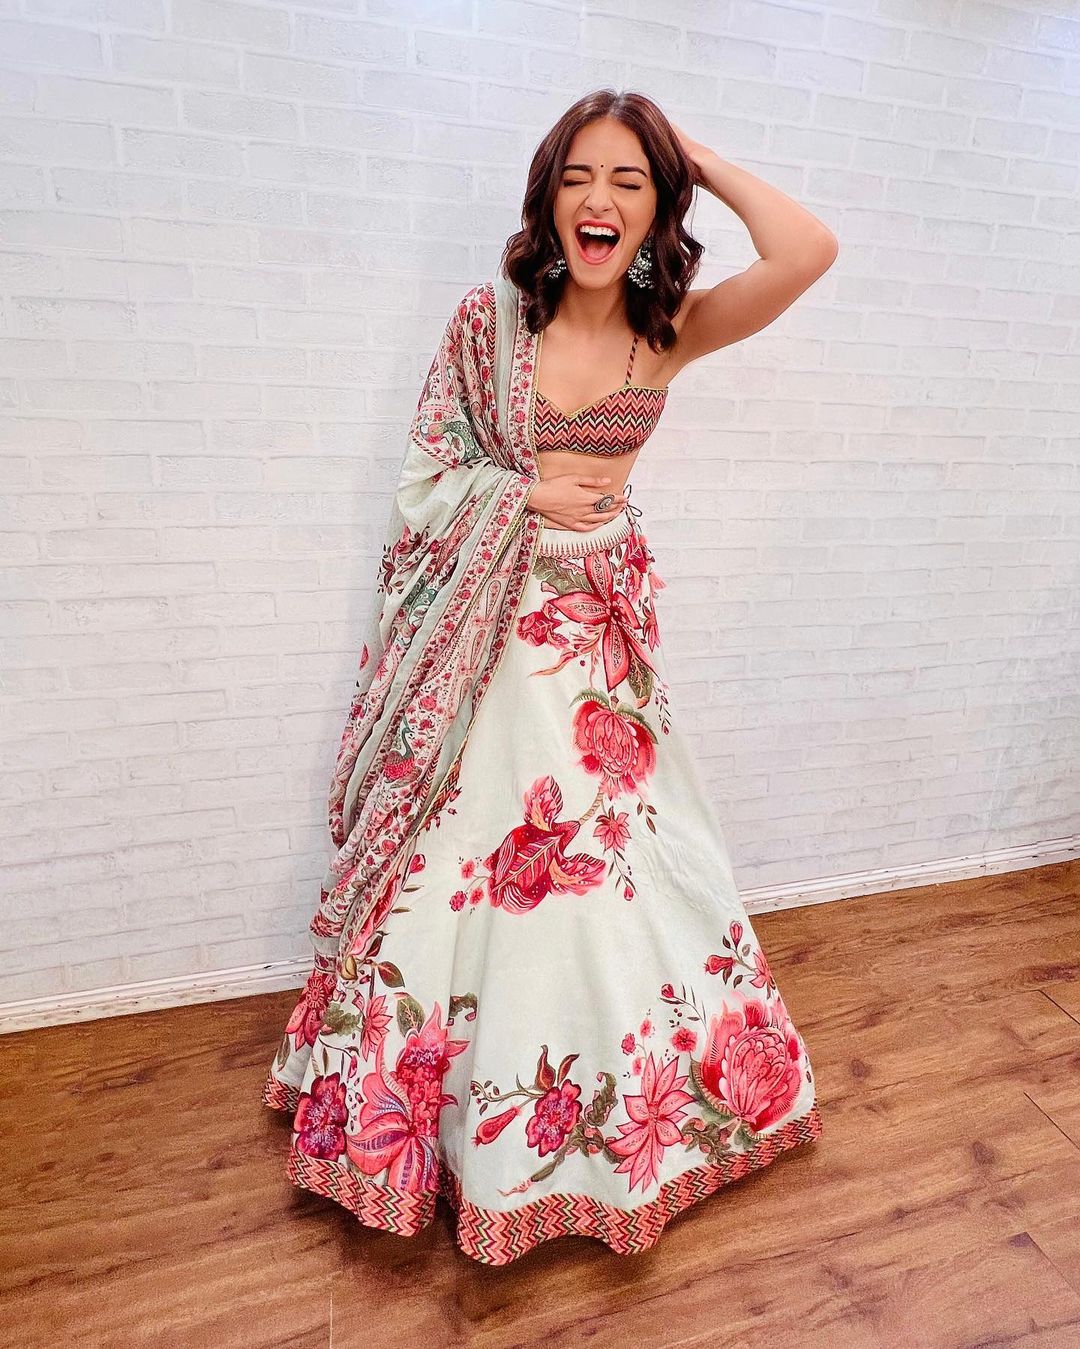 Celeb Style Alert: You Must Zoom In To See The Details Of Ananya Panday's Fab Floral Lehenga